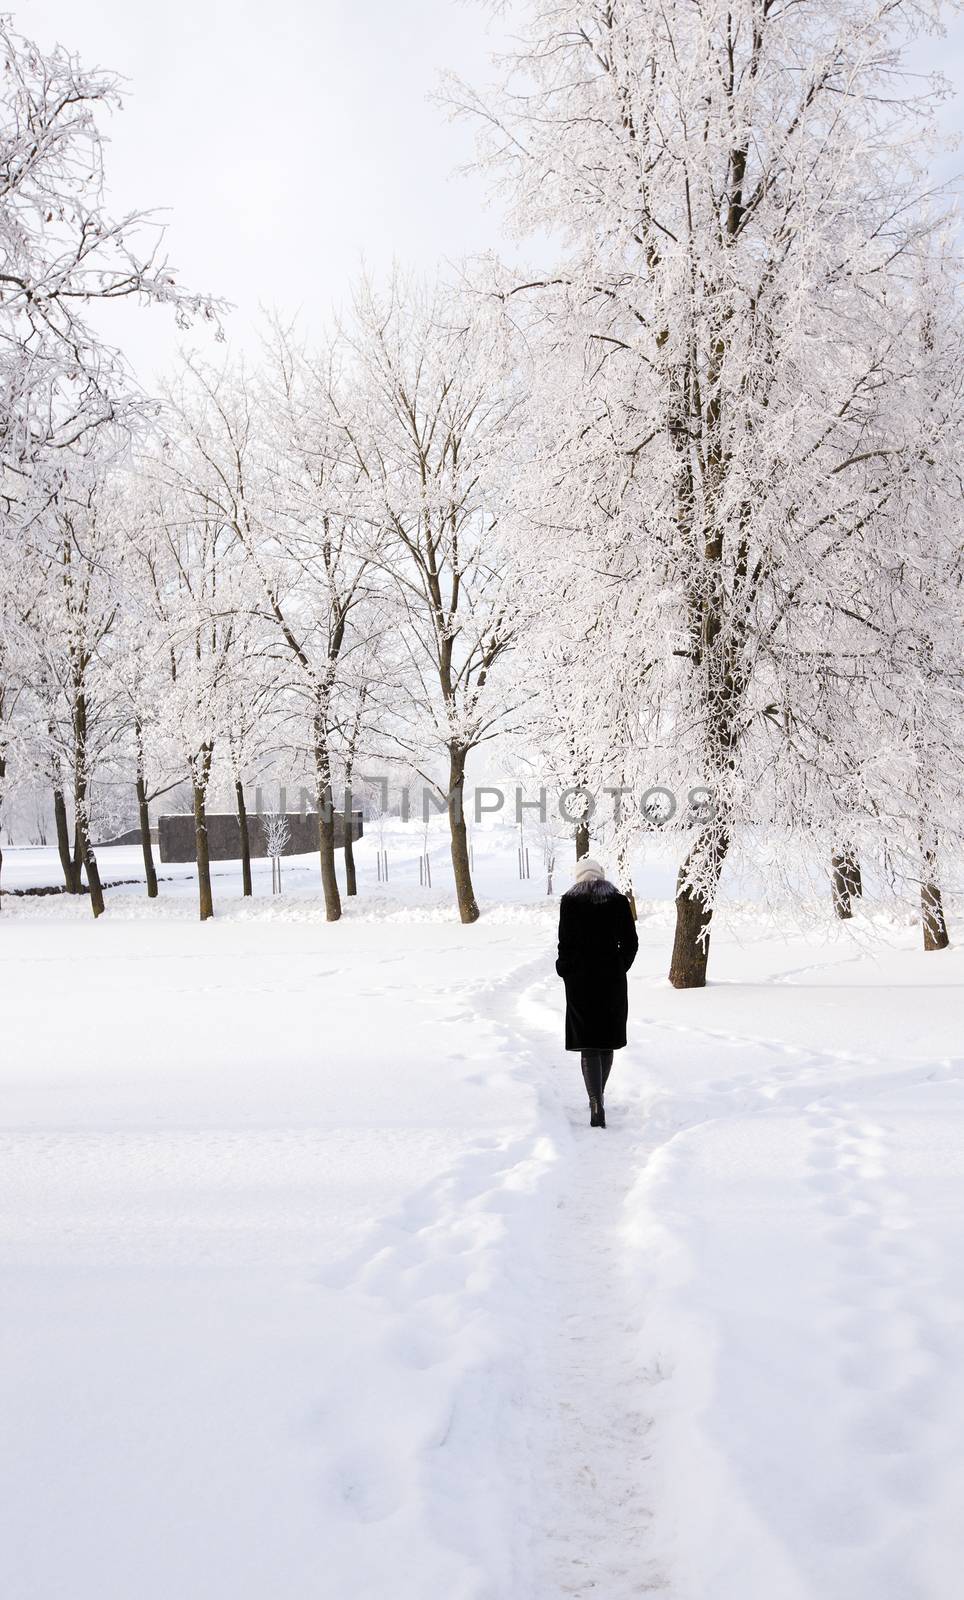  the girl going on a footpath in park. winter season